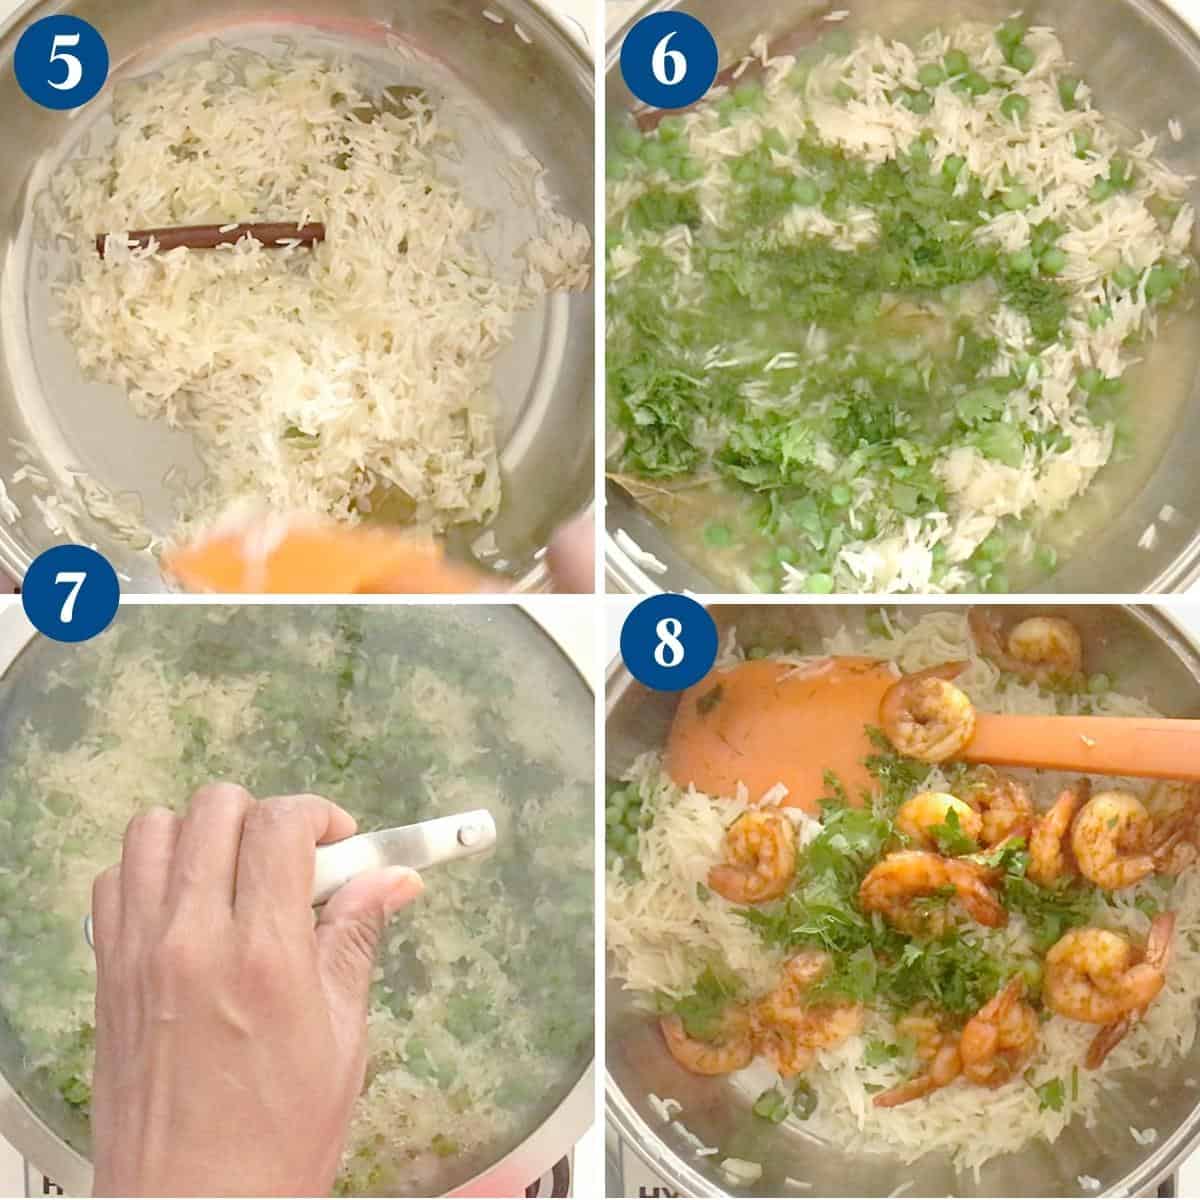 Progress pictures collage making the rice with shrimps.